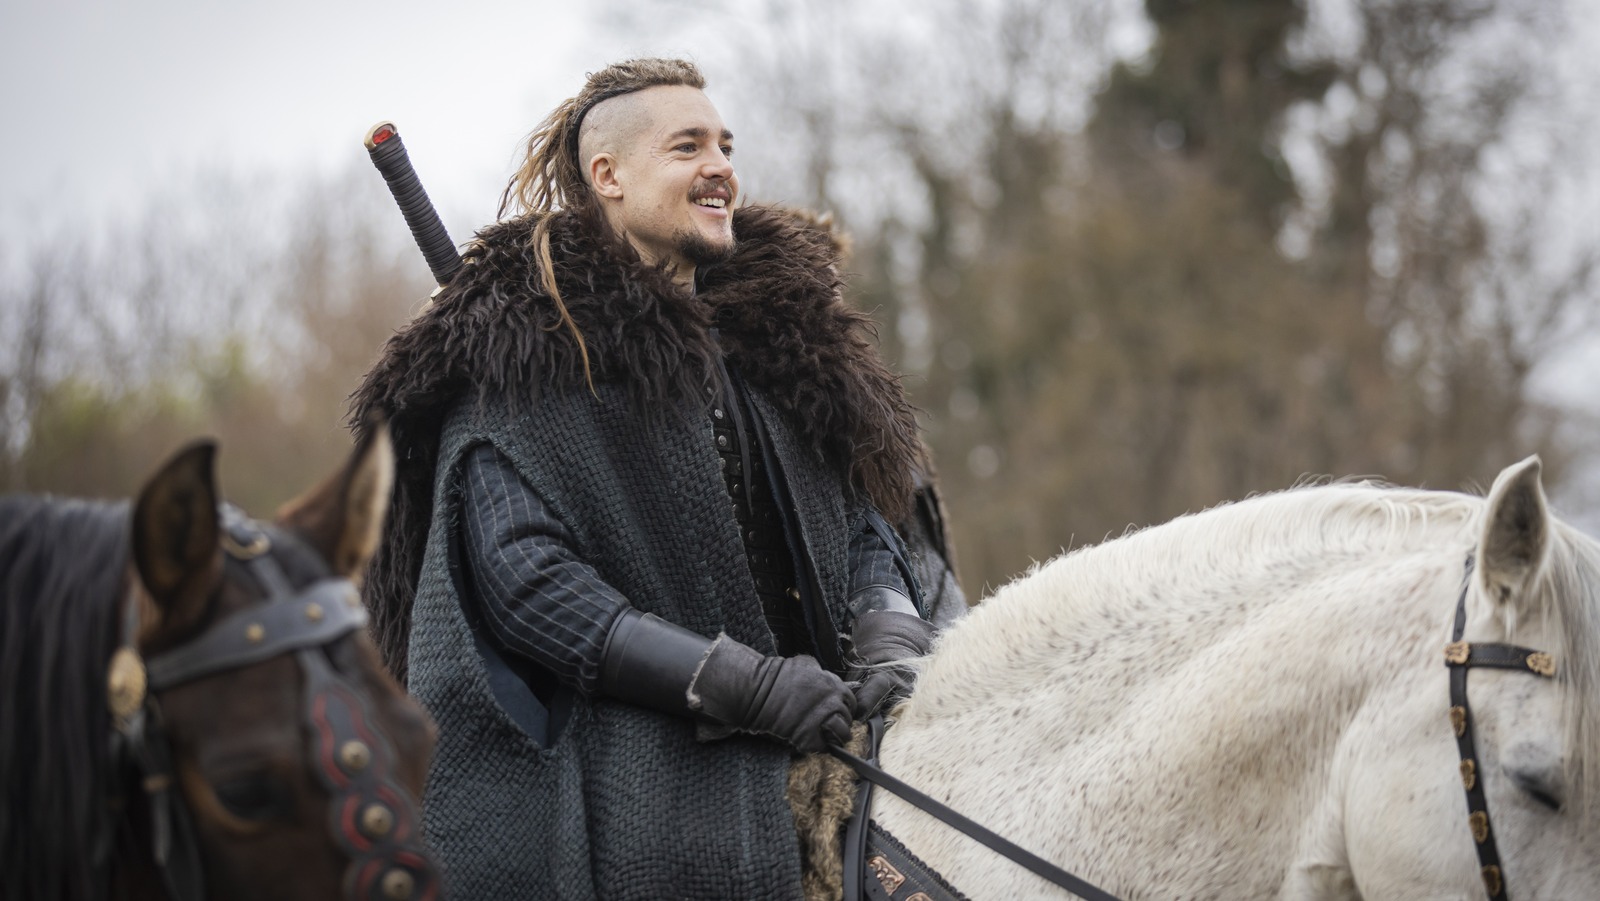 A long path back to that Last Kingdom and the real Uhtred the Bold!